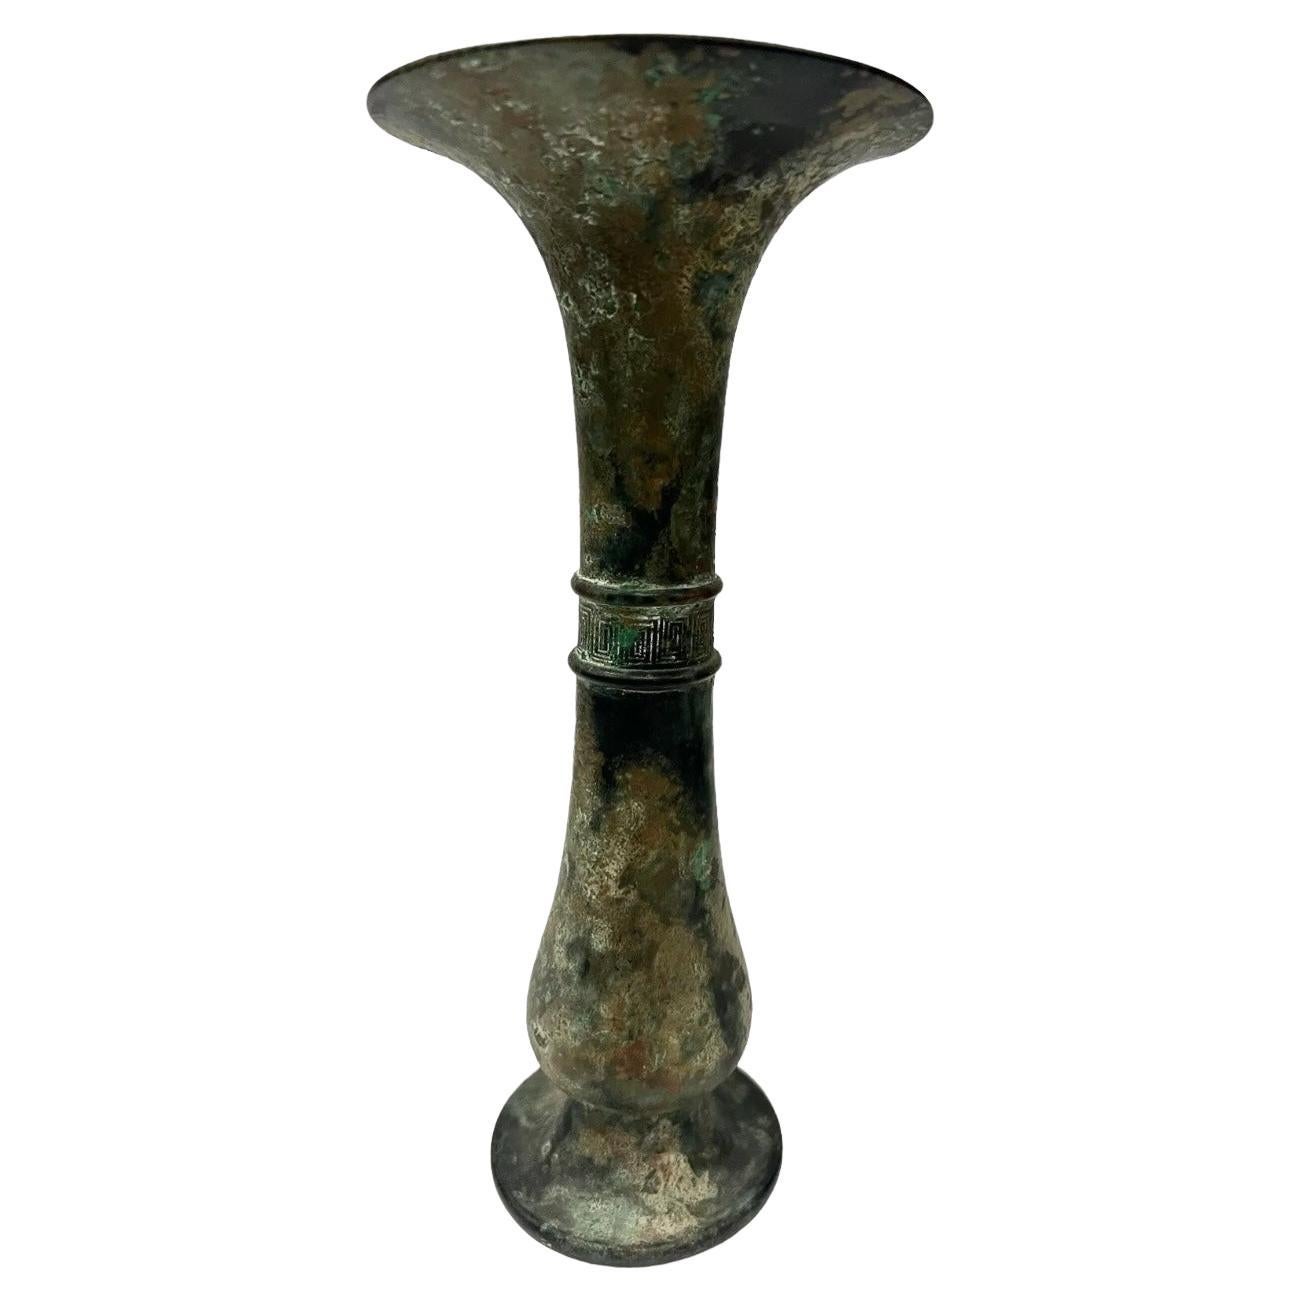 Archaic Bronze Wine Vessel, Late Shang Dynasty